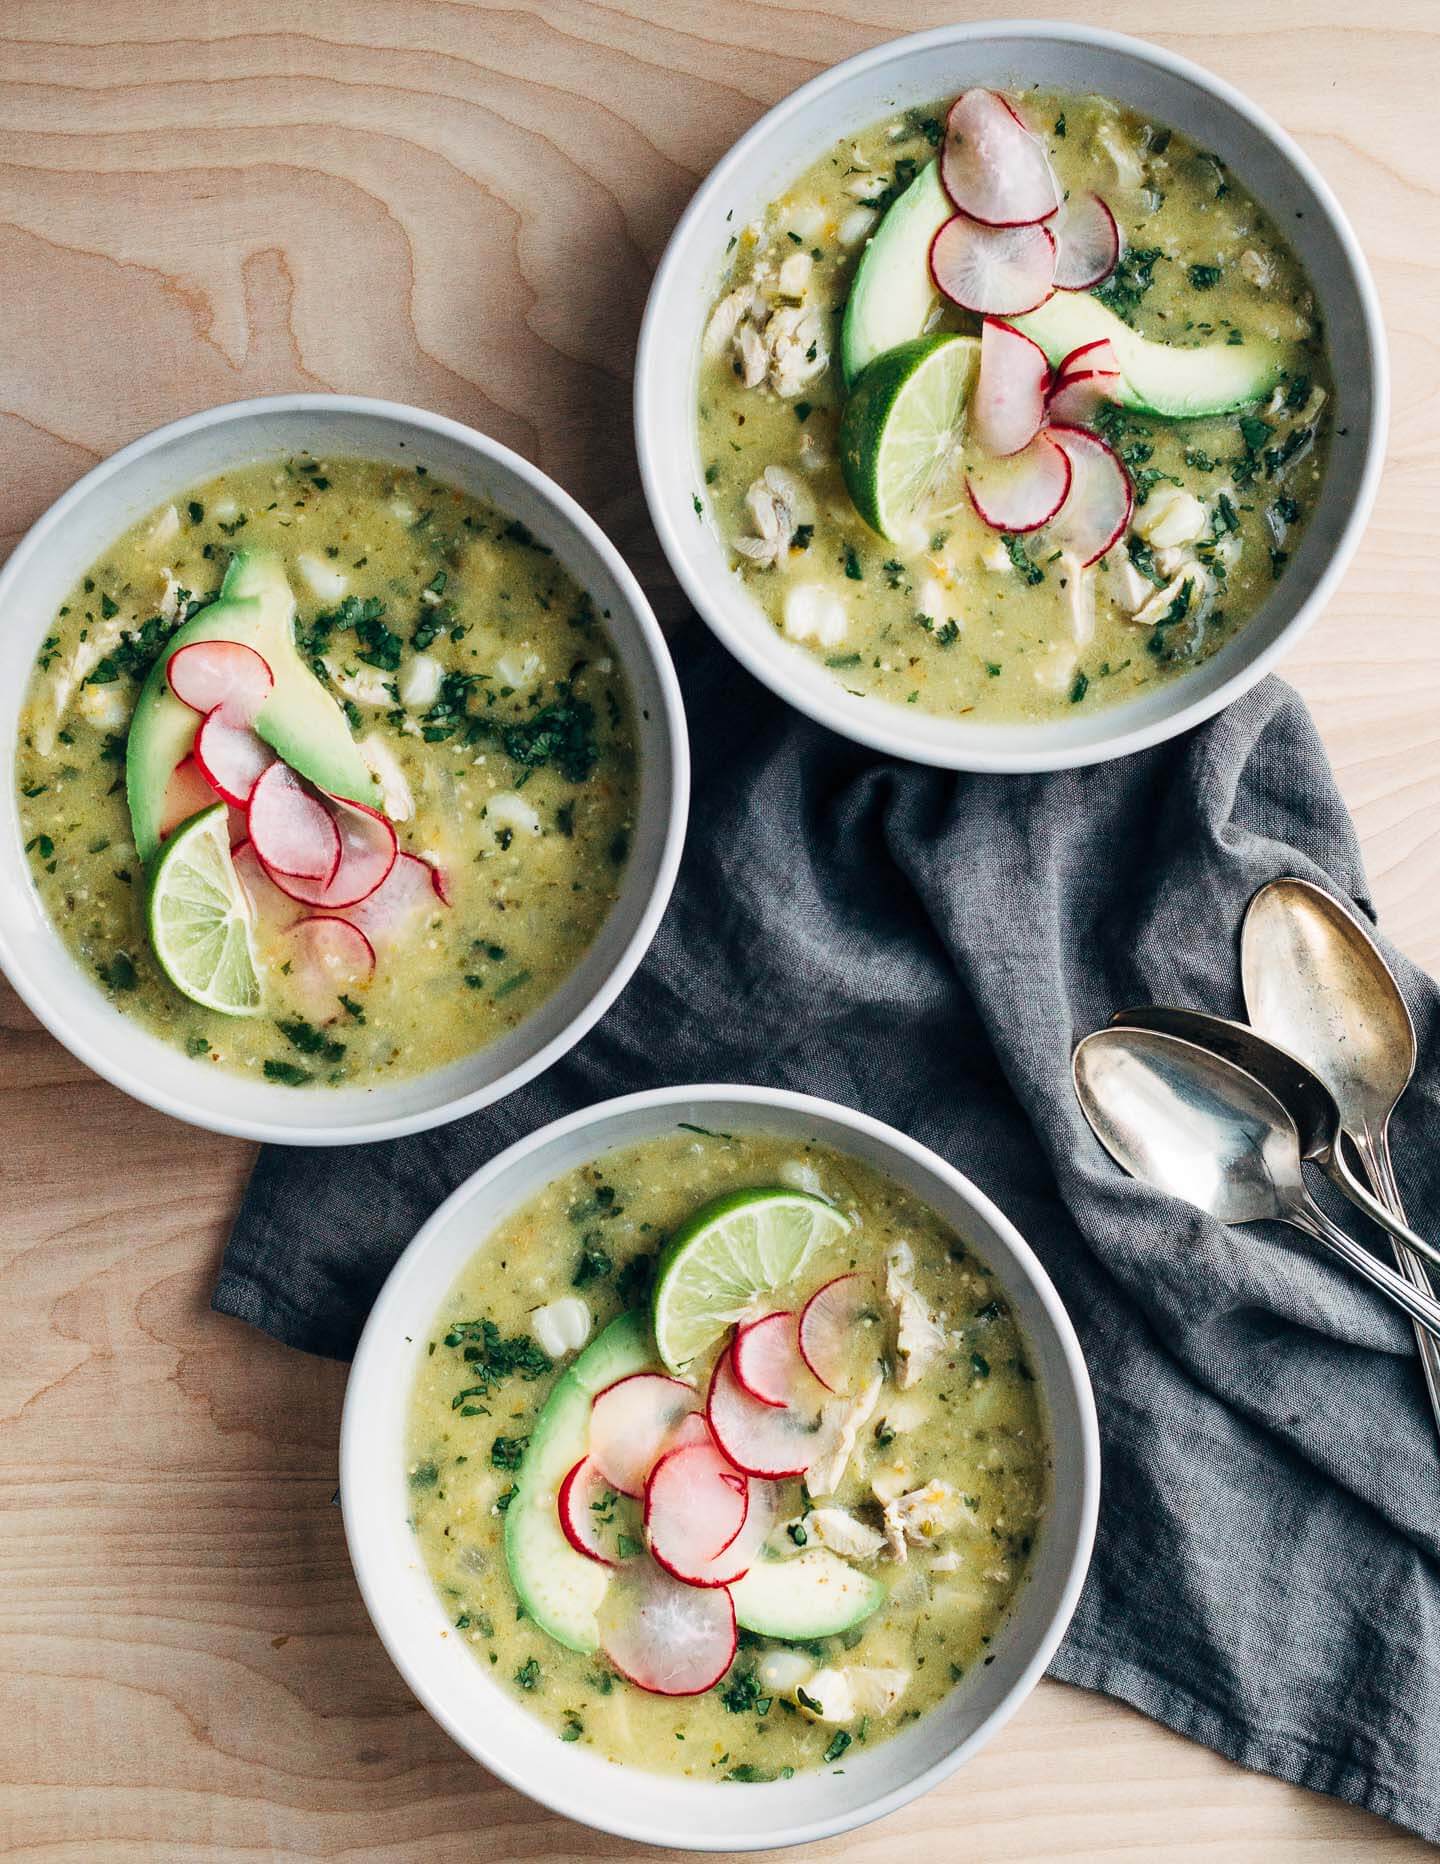 A fortifying mix of rich chicken broth, tender shredded chicken, chewy corn hominy, and tart tomatillos make this chicken pozole verde the ideal dish to see you through the end of winter (and cold season). 